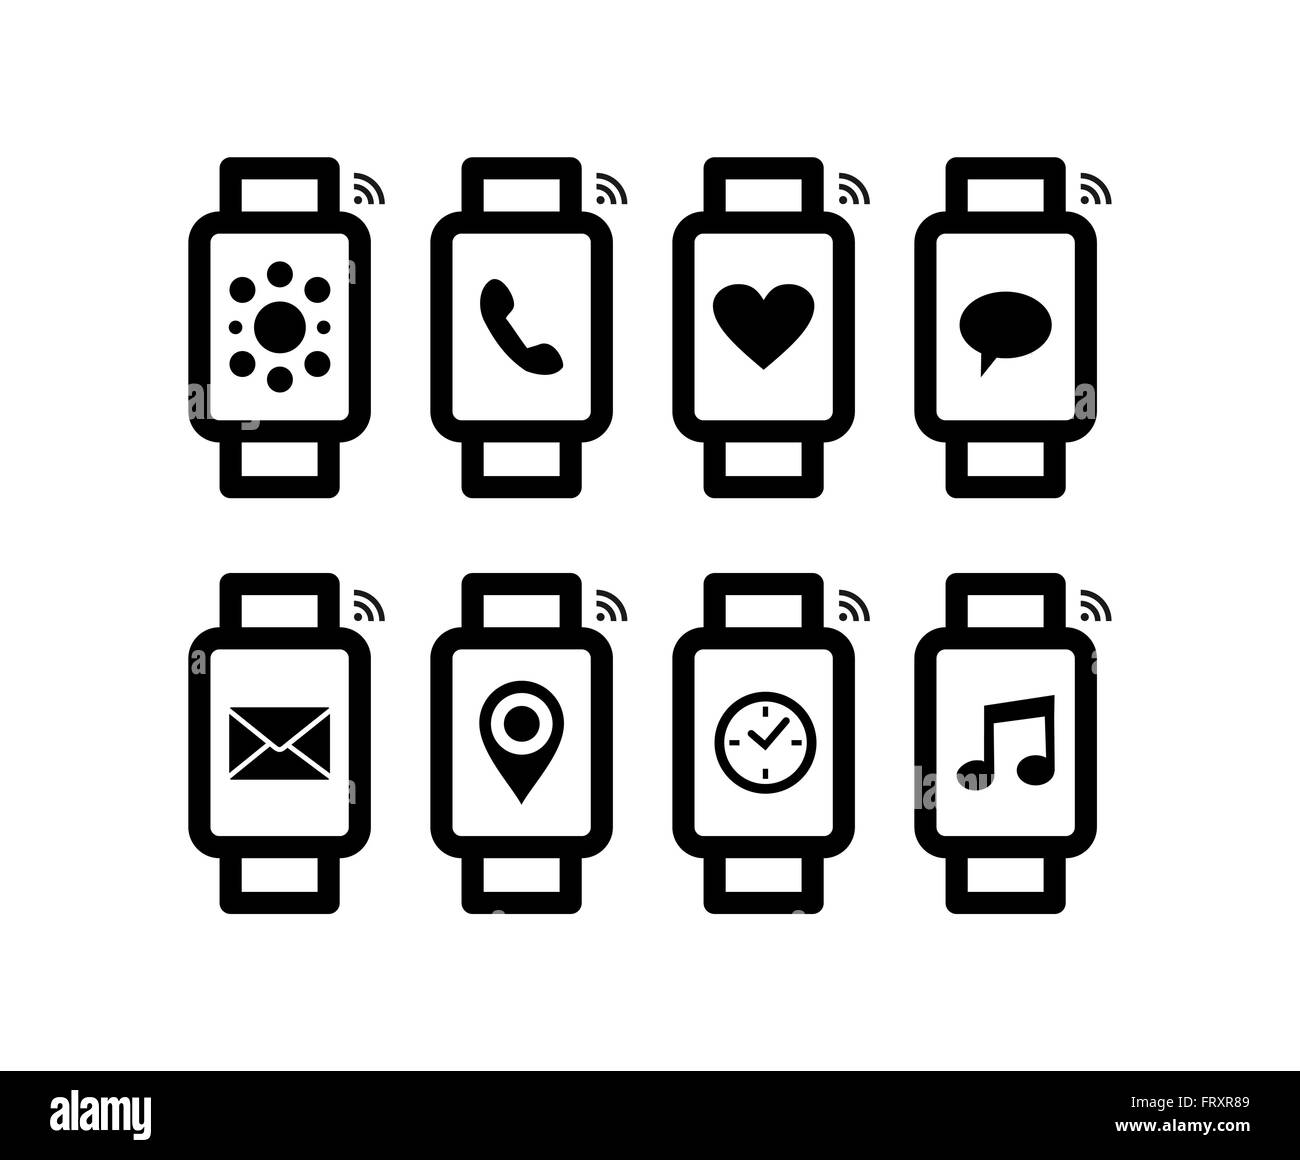 Set of line art style smart watch designs with social app notification on screen, includes gps, mail, music and message icons. Stock Vector